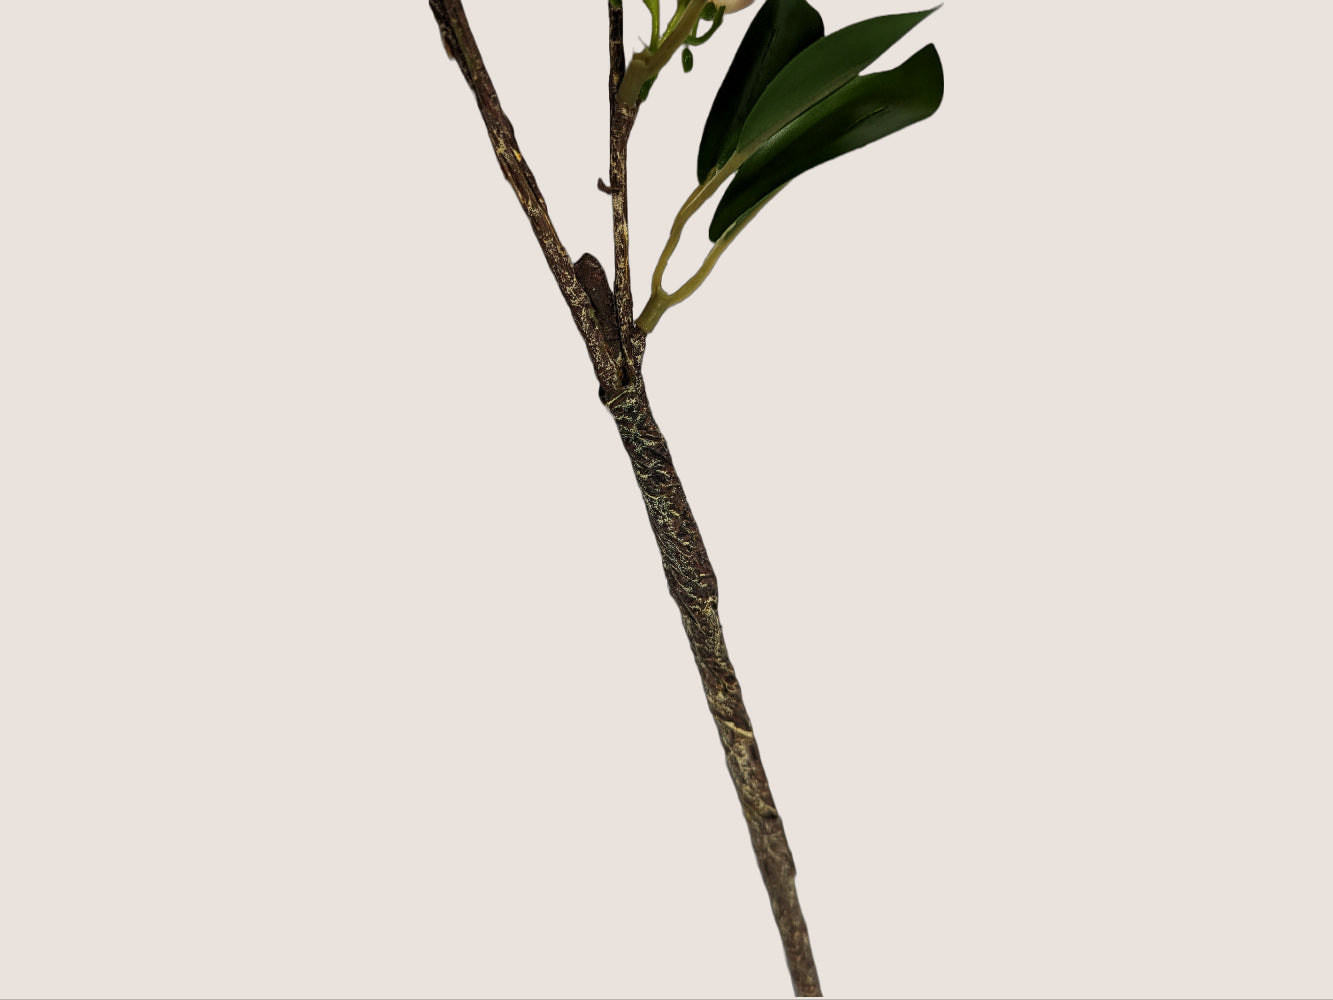 Image of an artificial lilac stem featuring lifelike features of brown stem. The buds are light green and the stem has realistic texture and detailing. The stem is shown against a neutral beige background.